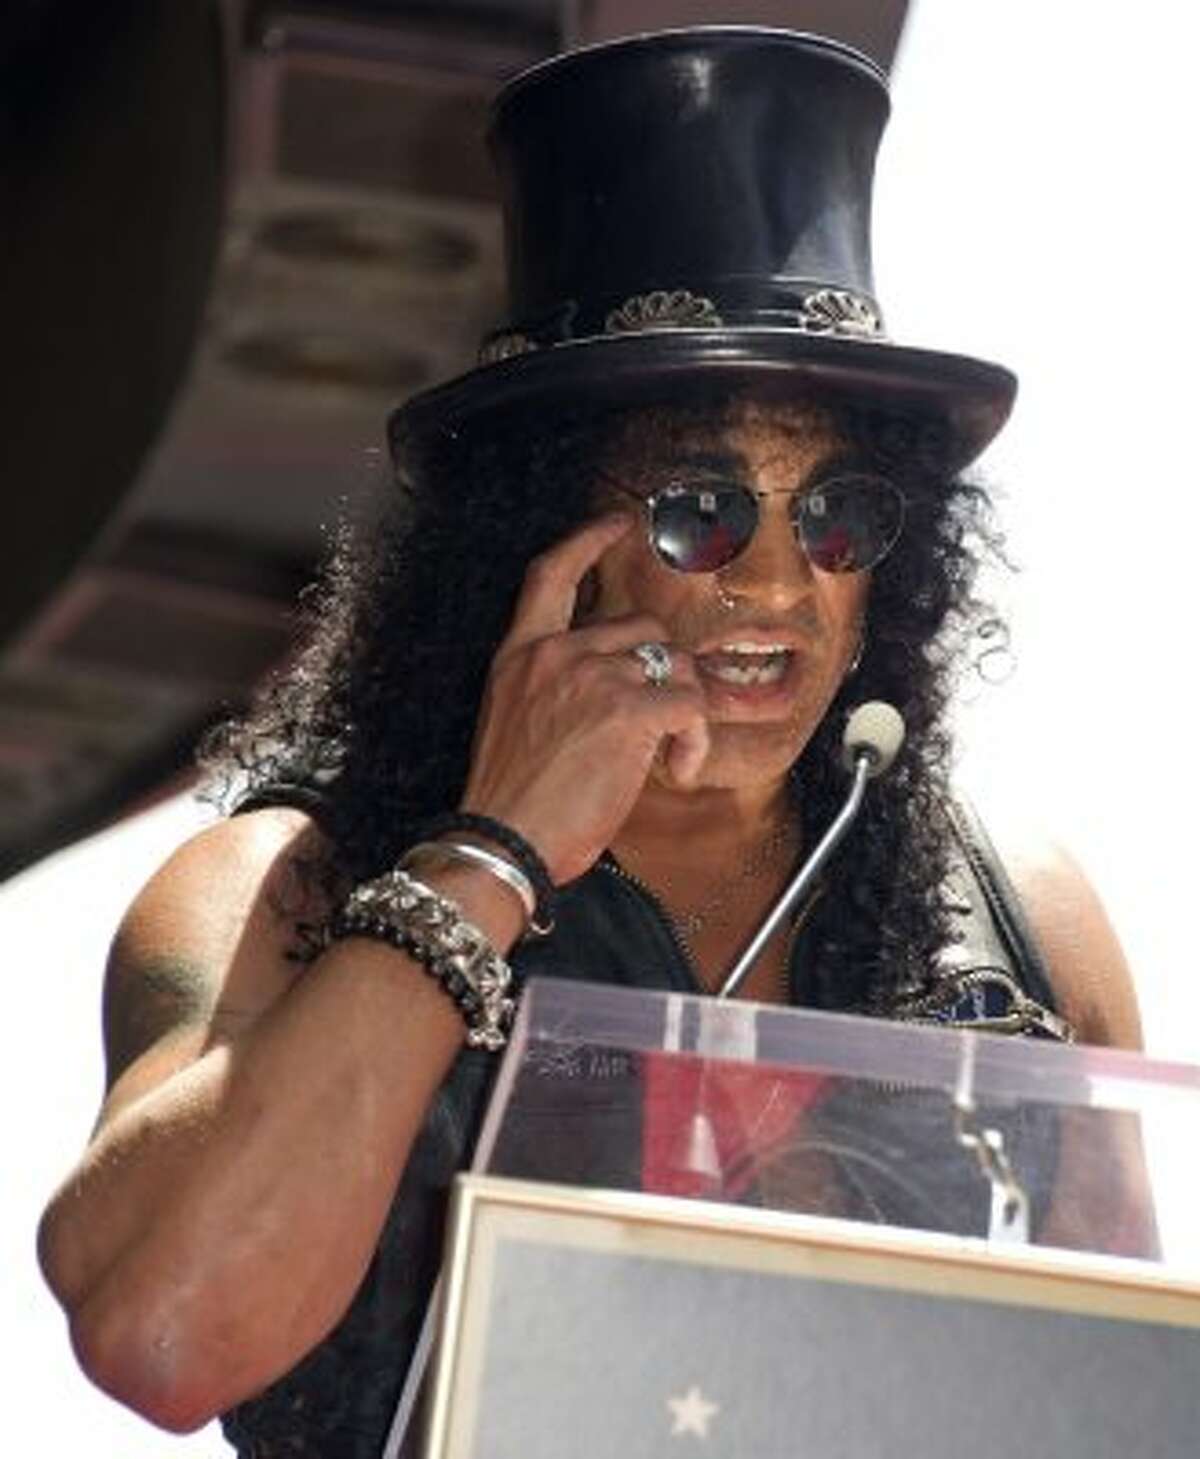 Musician and songwriter Slash (Saul Hudson) is a honored with a Star on the Hollywood Walk of Fame on July 10, 2012 in Hollywood, California. (JOE KLAMAR / AFP/Getty Images)